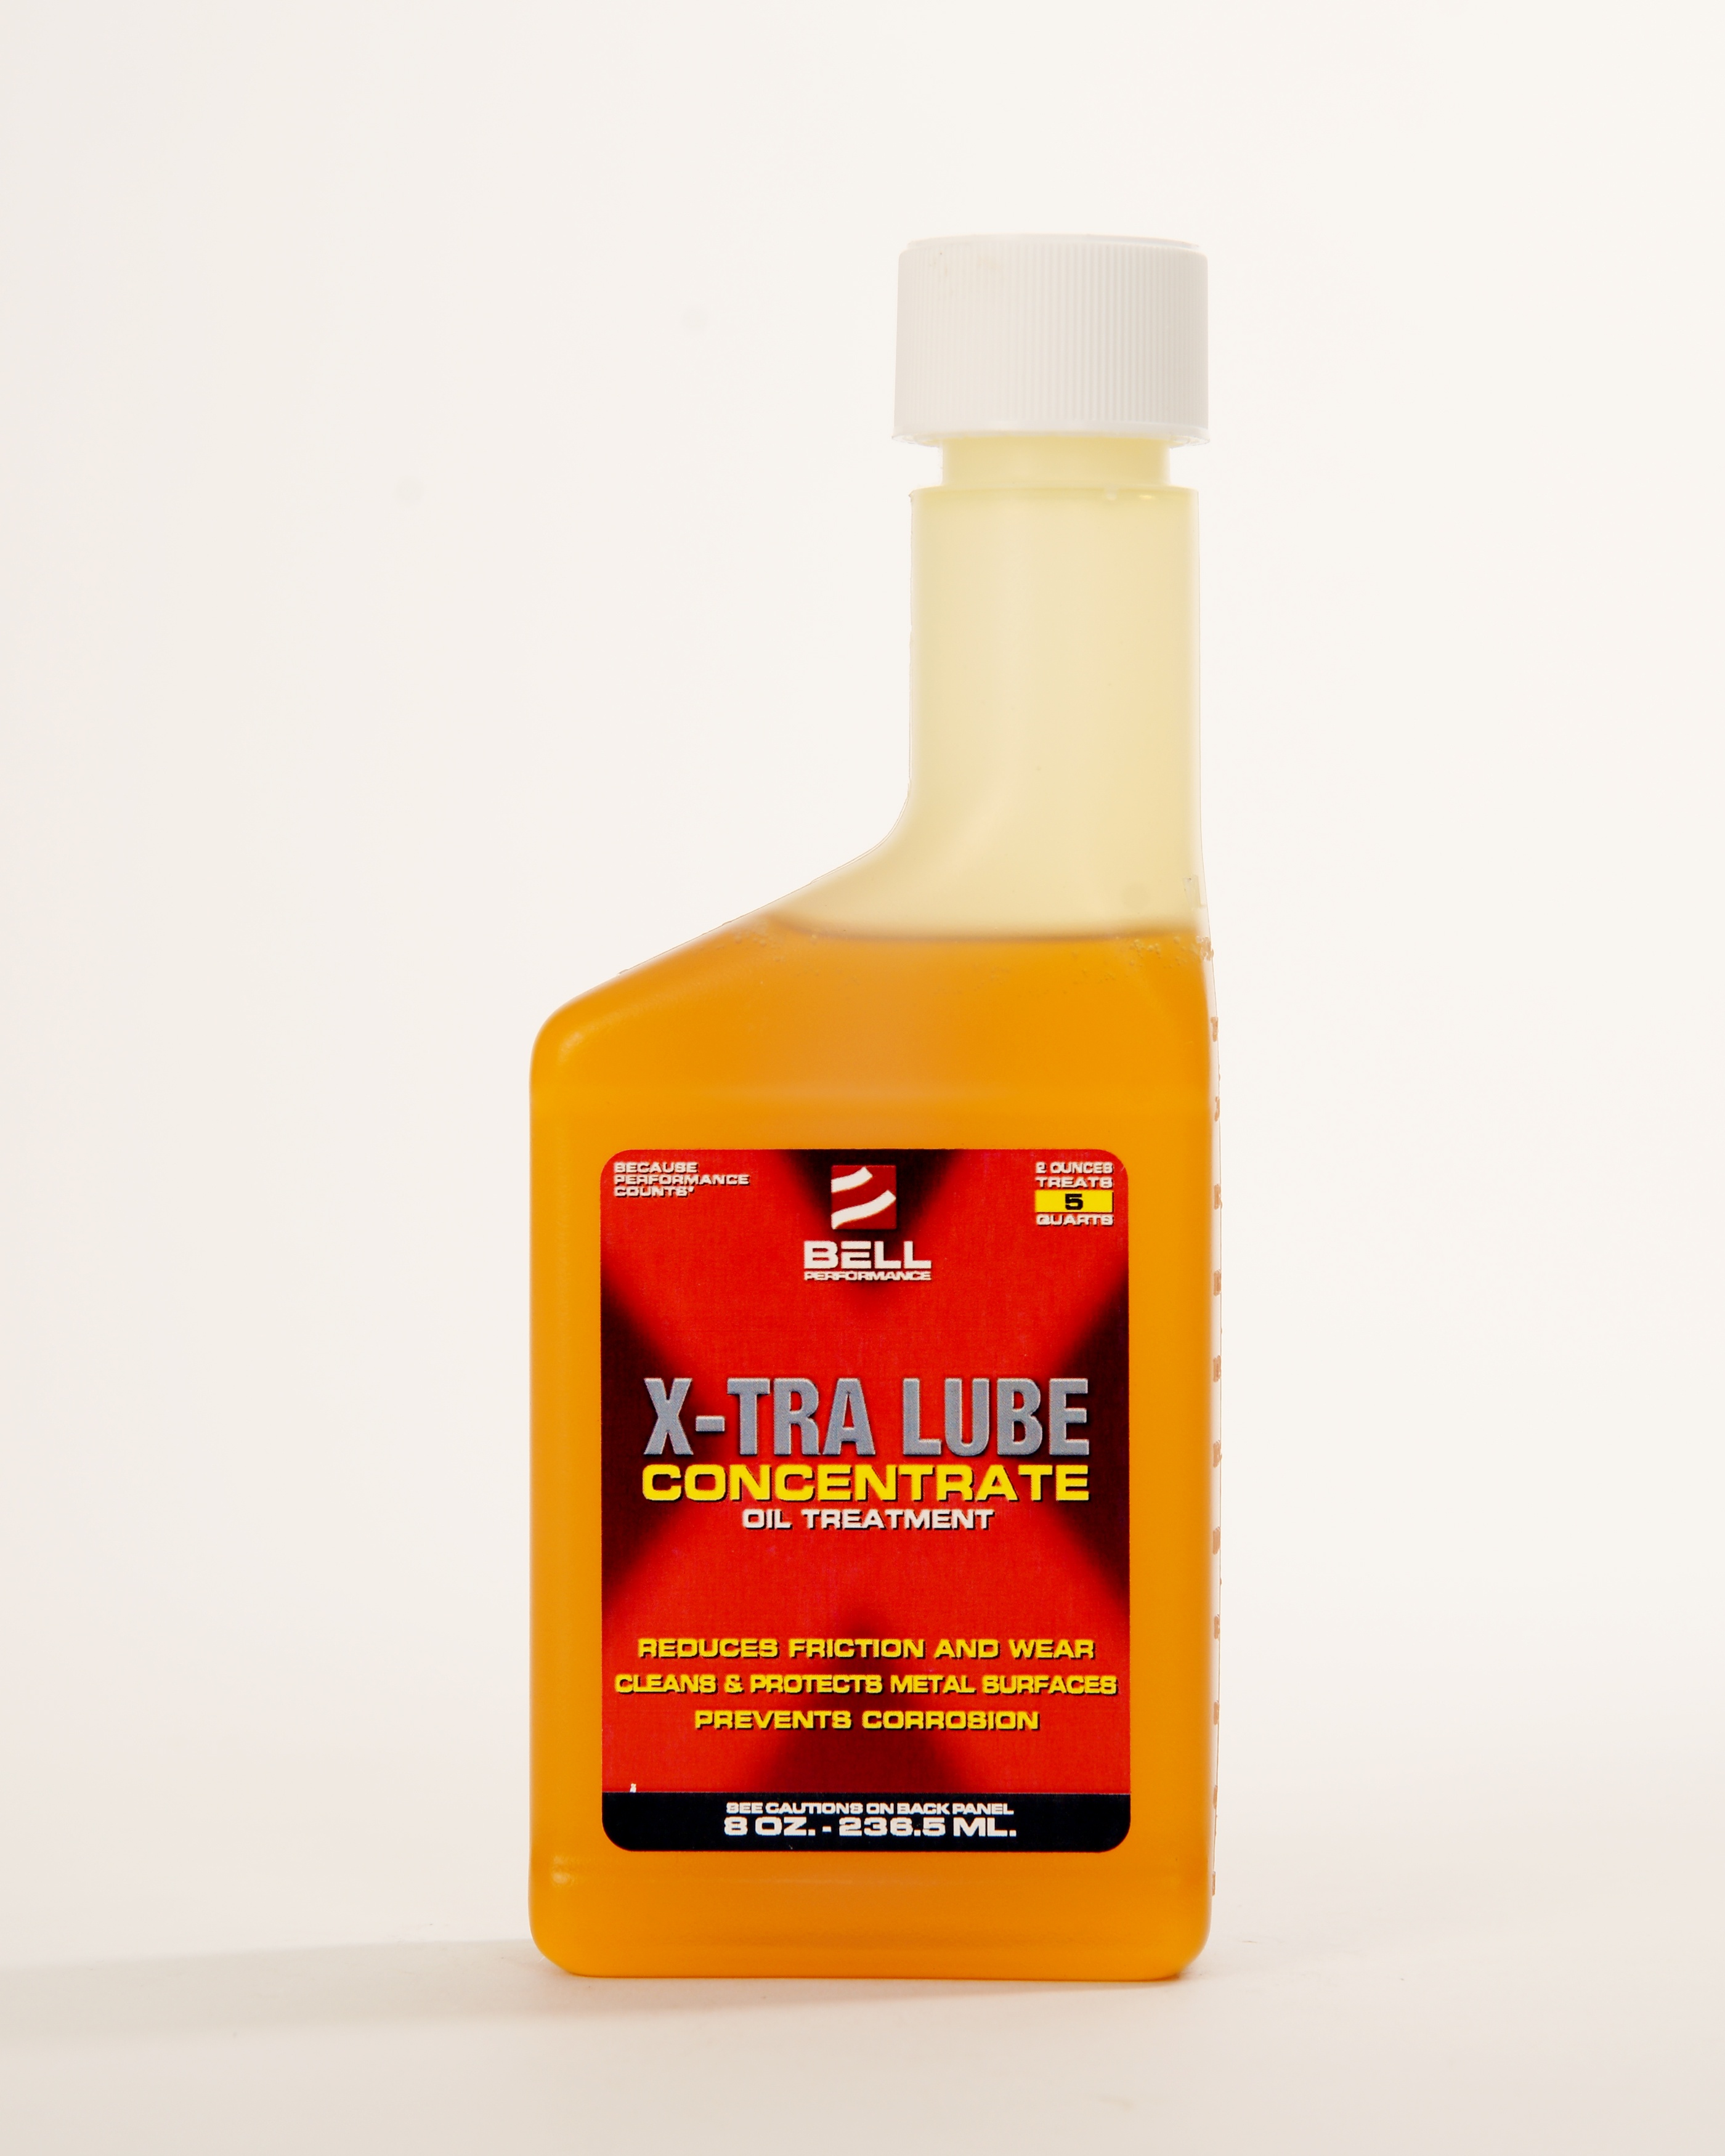 X-TRA LUBE CONCENTRATE 8 OZ.jpg